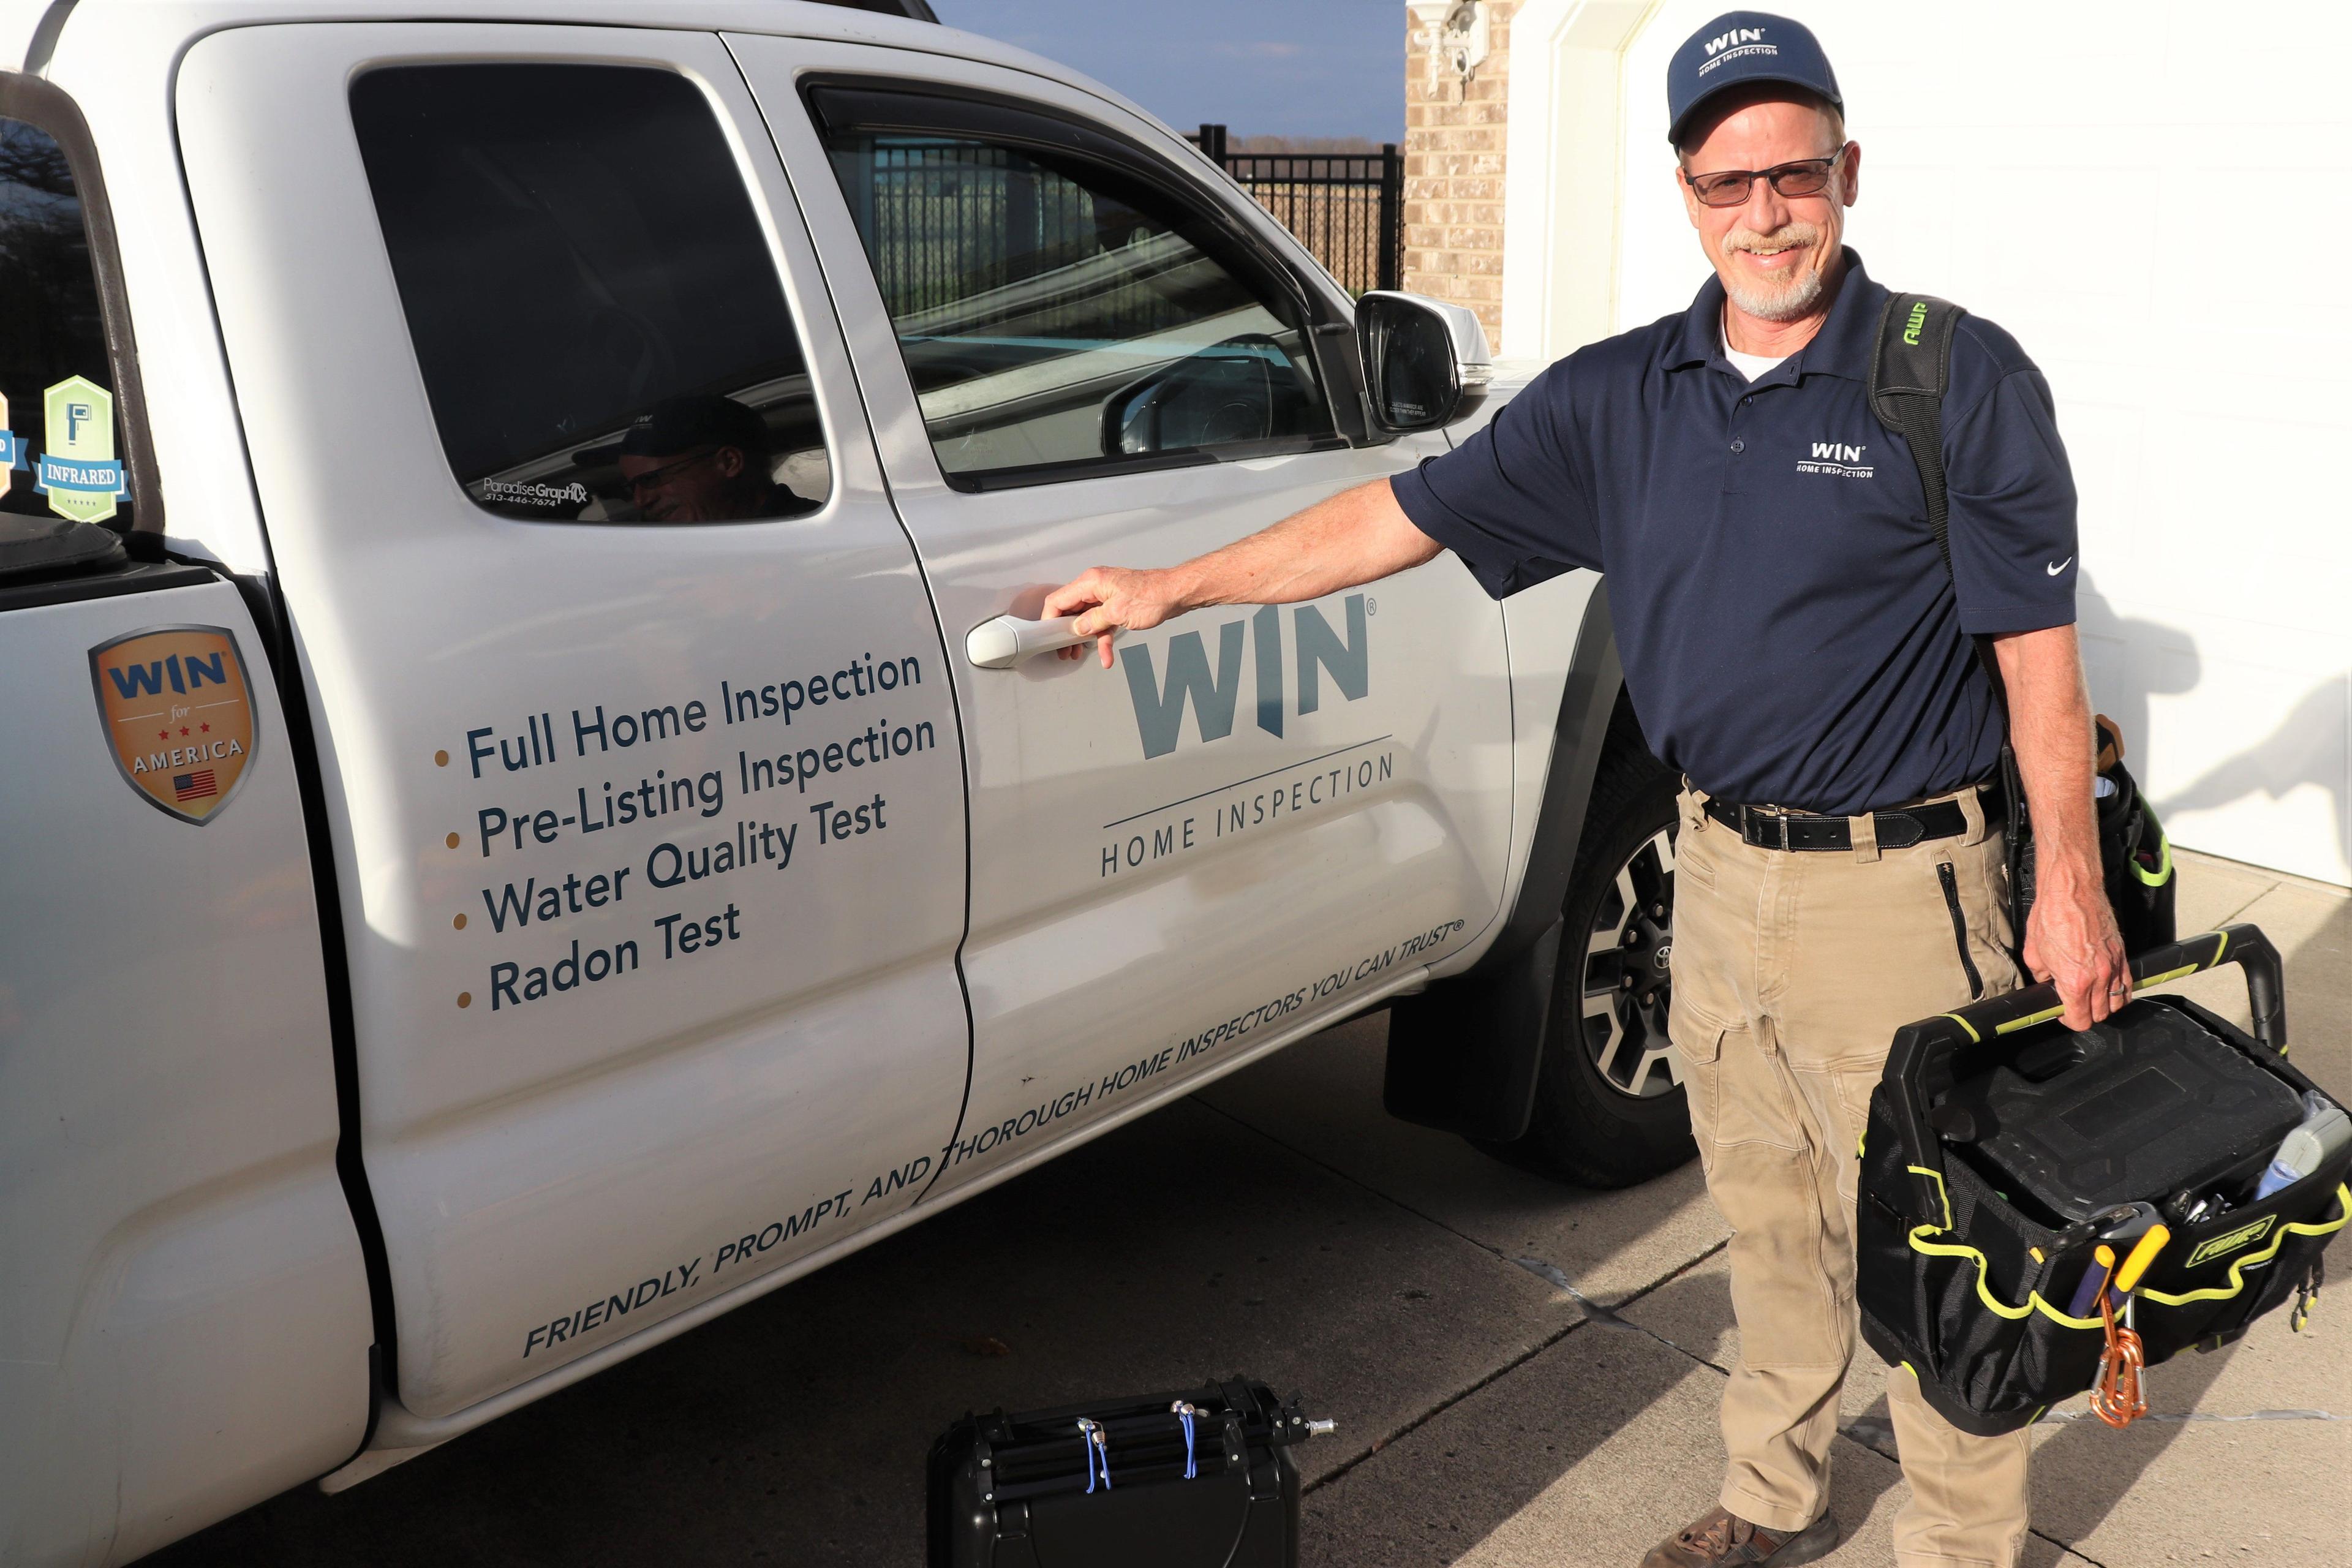 WIN Home Inspector with their branded WIN vehicle and inspection tolls.